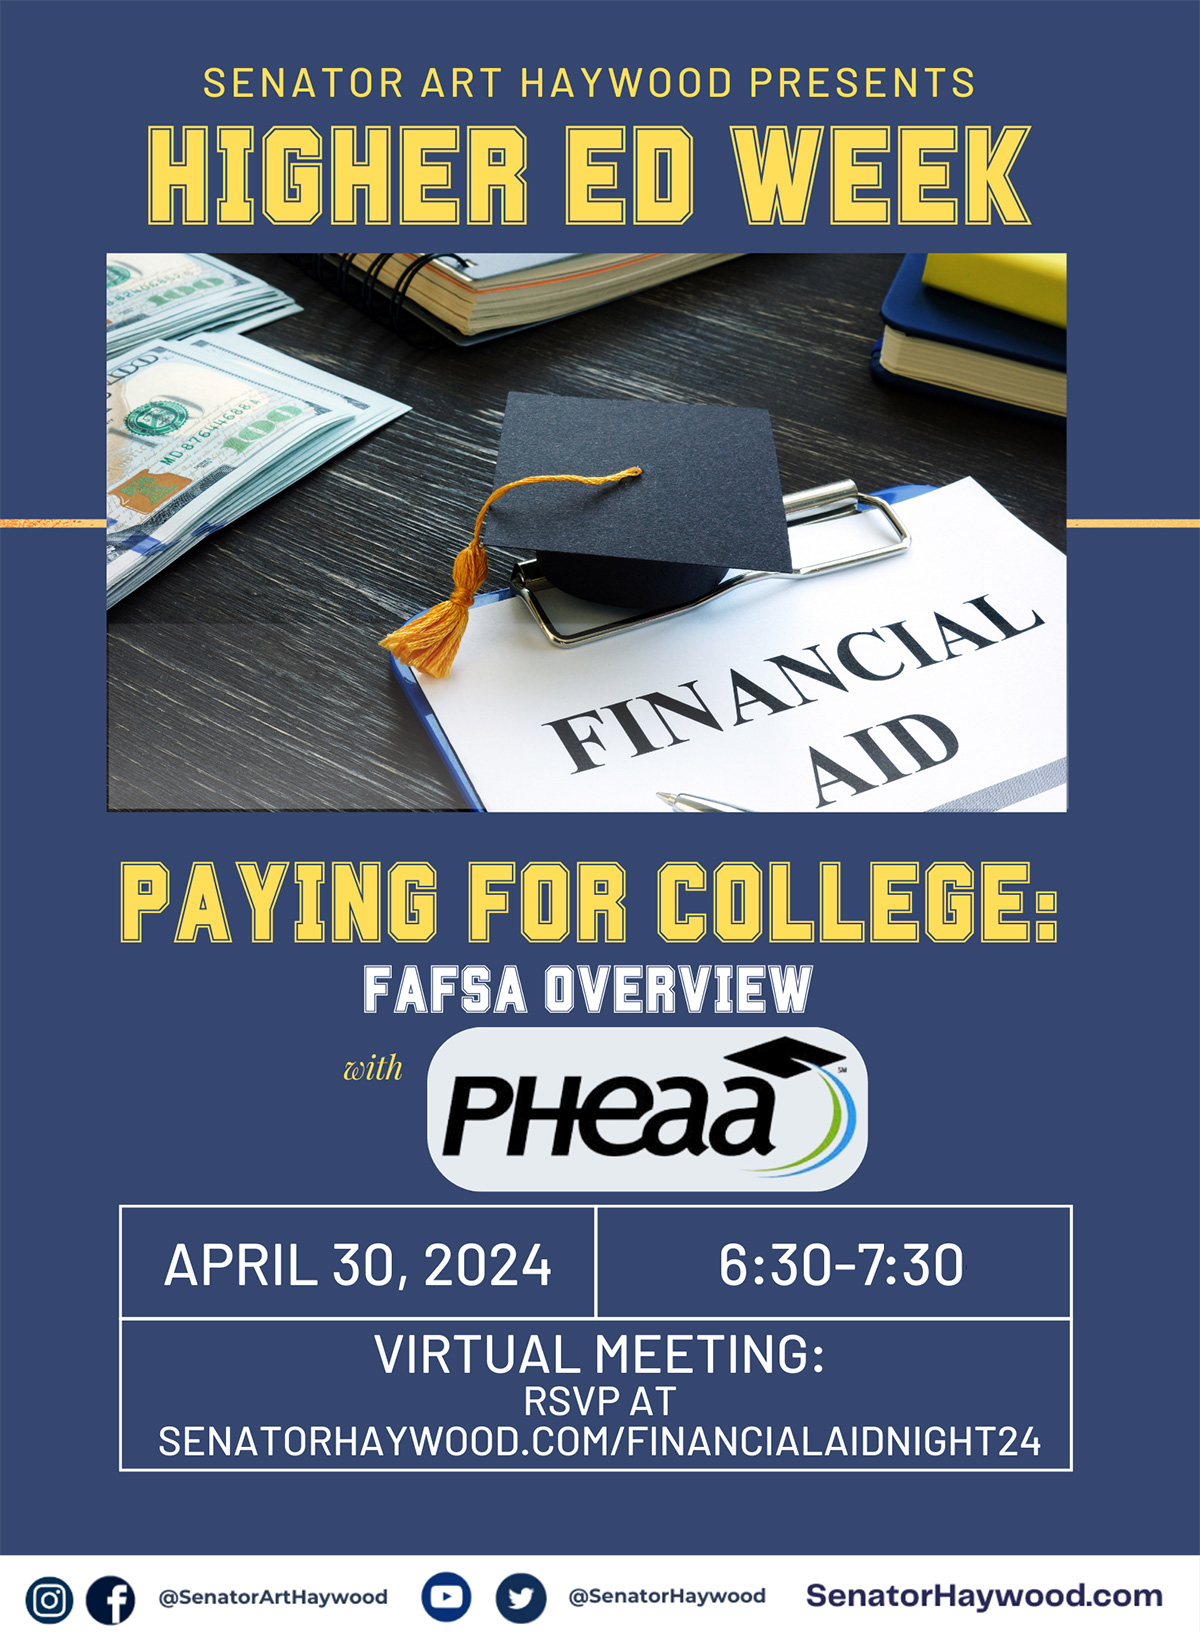 Paying for College: FAFSA Overview - April 30, 2024